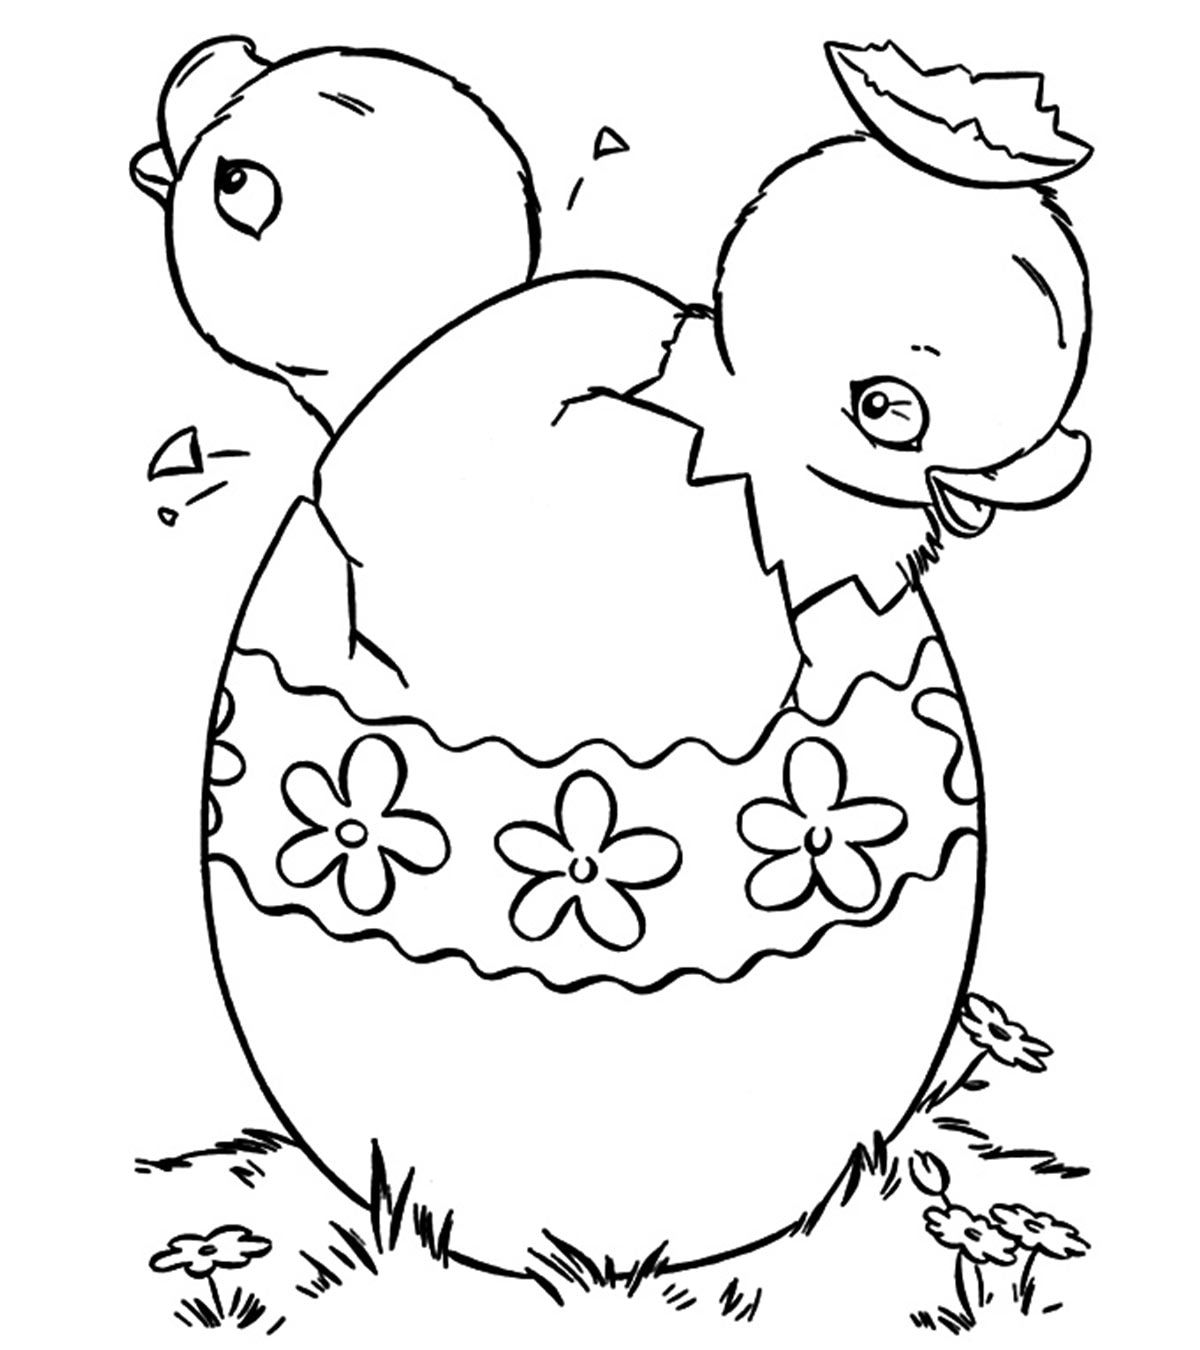 25 Amazing Easter Egg Coloring Pages Your Toddler Will Love To Color